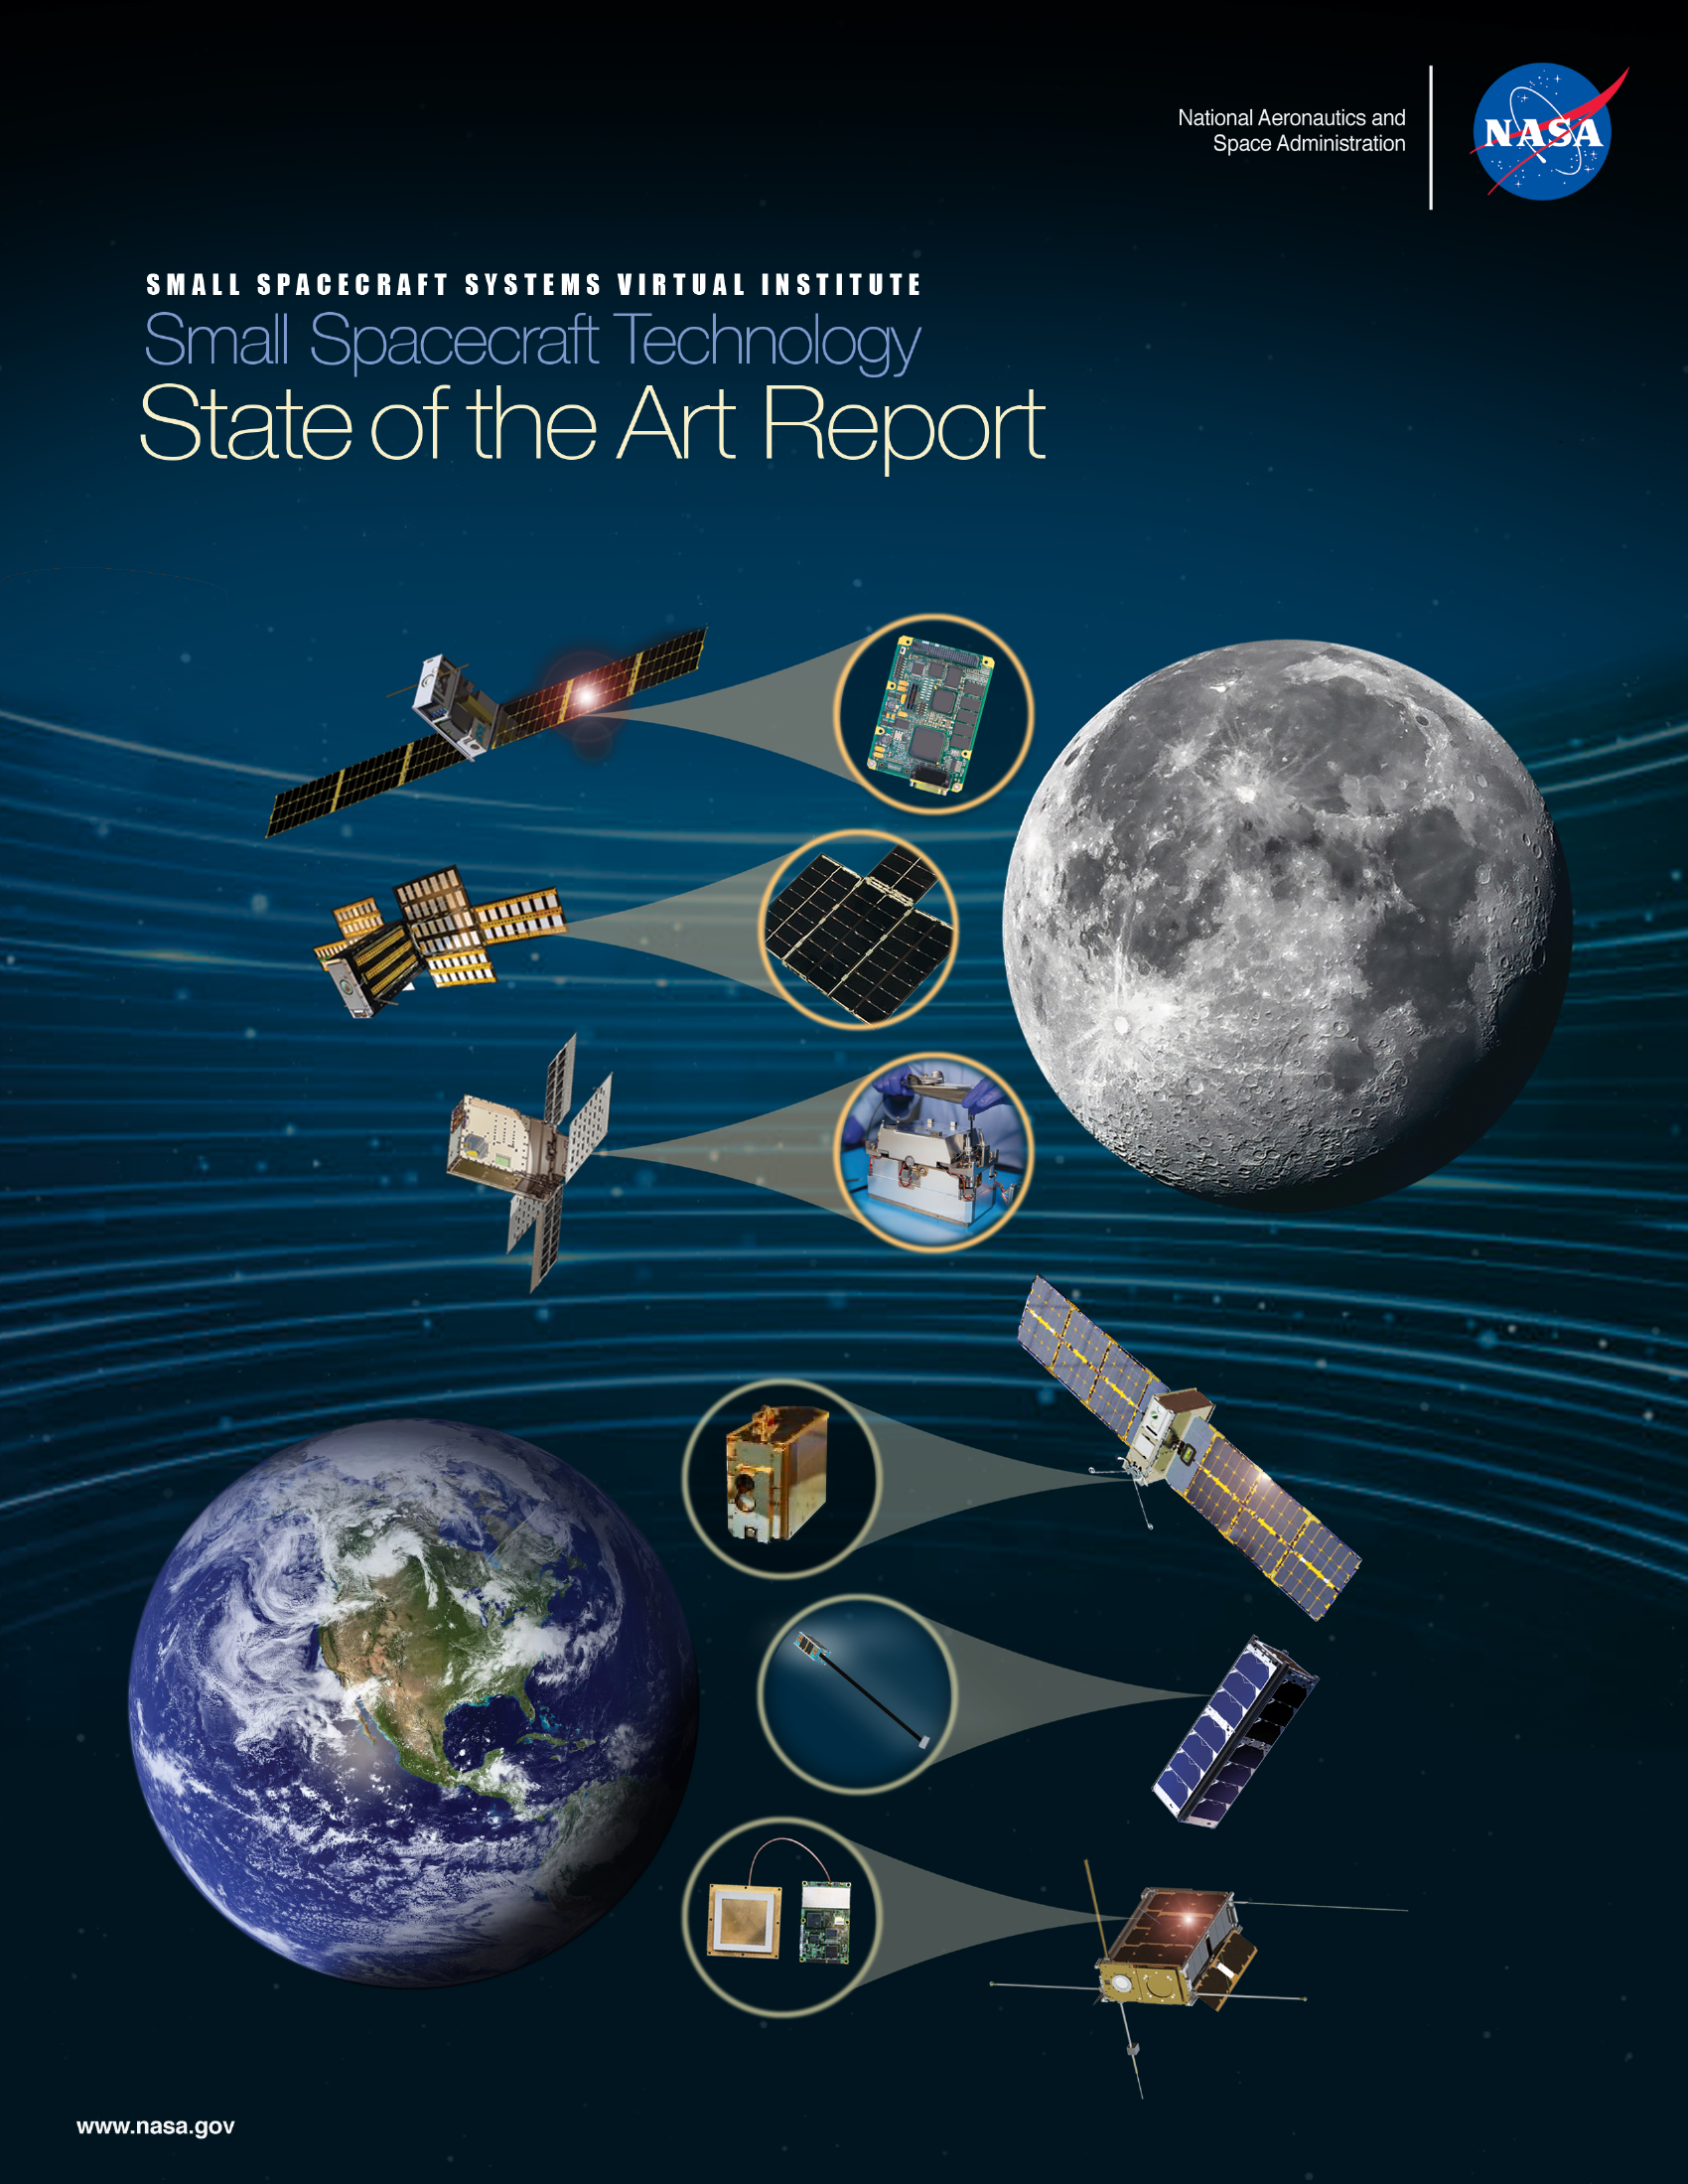 State-of-the-Art of Small Spacecraft Technology - NASA